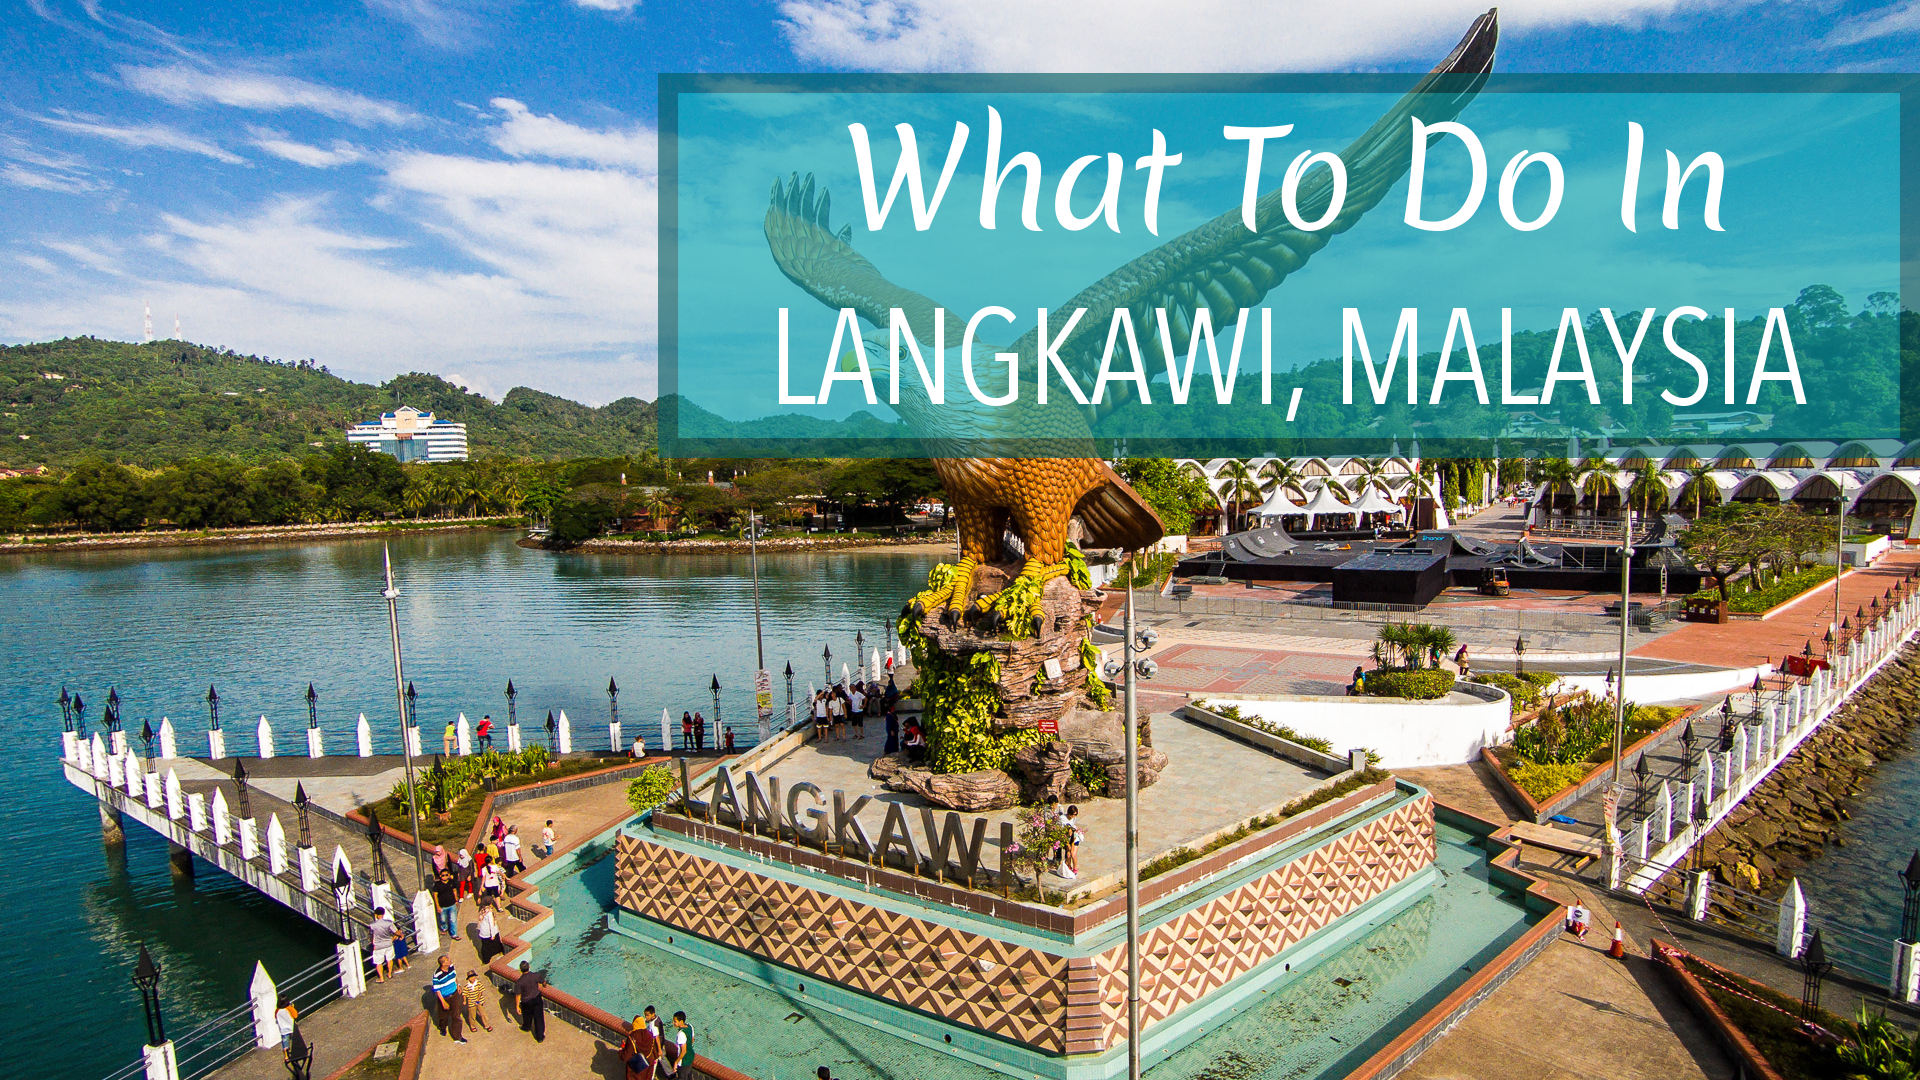 Langkawi do what to in